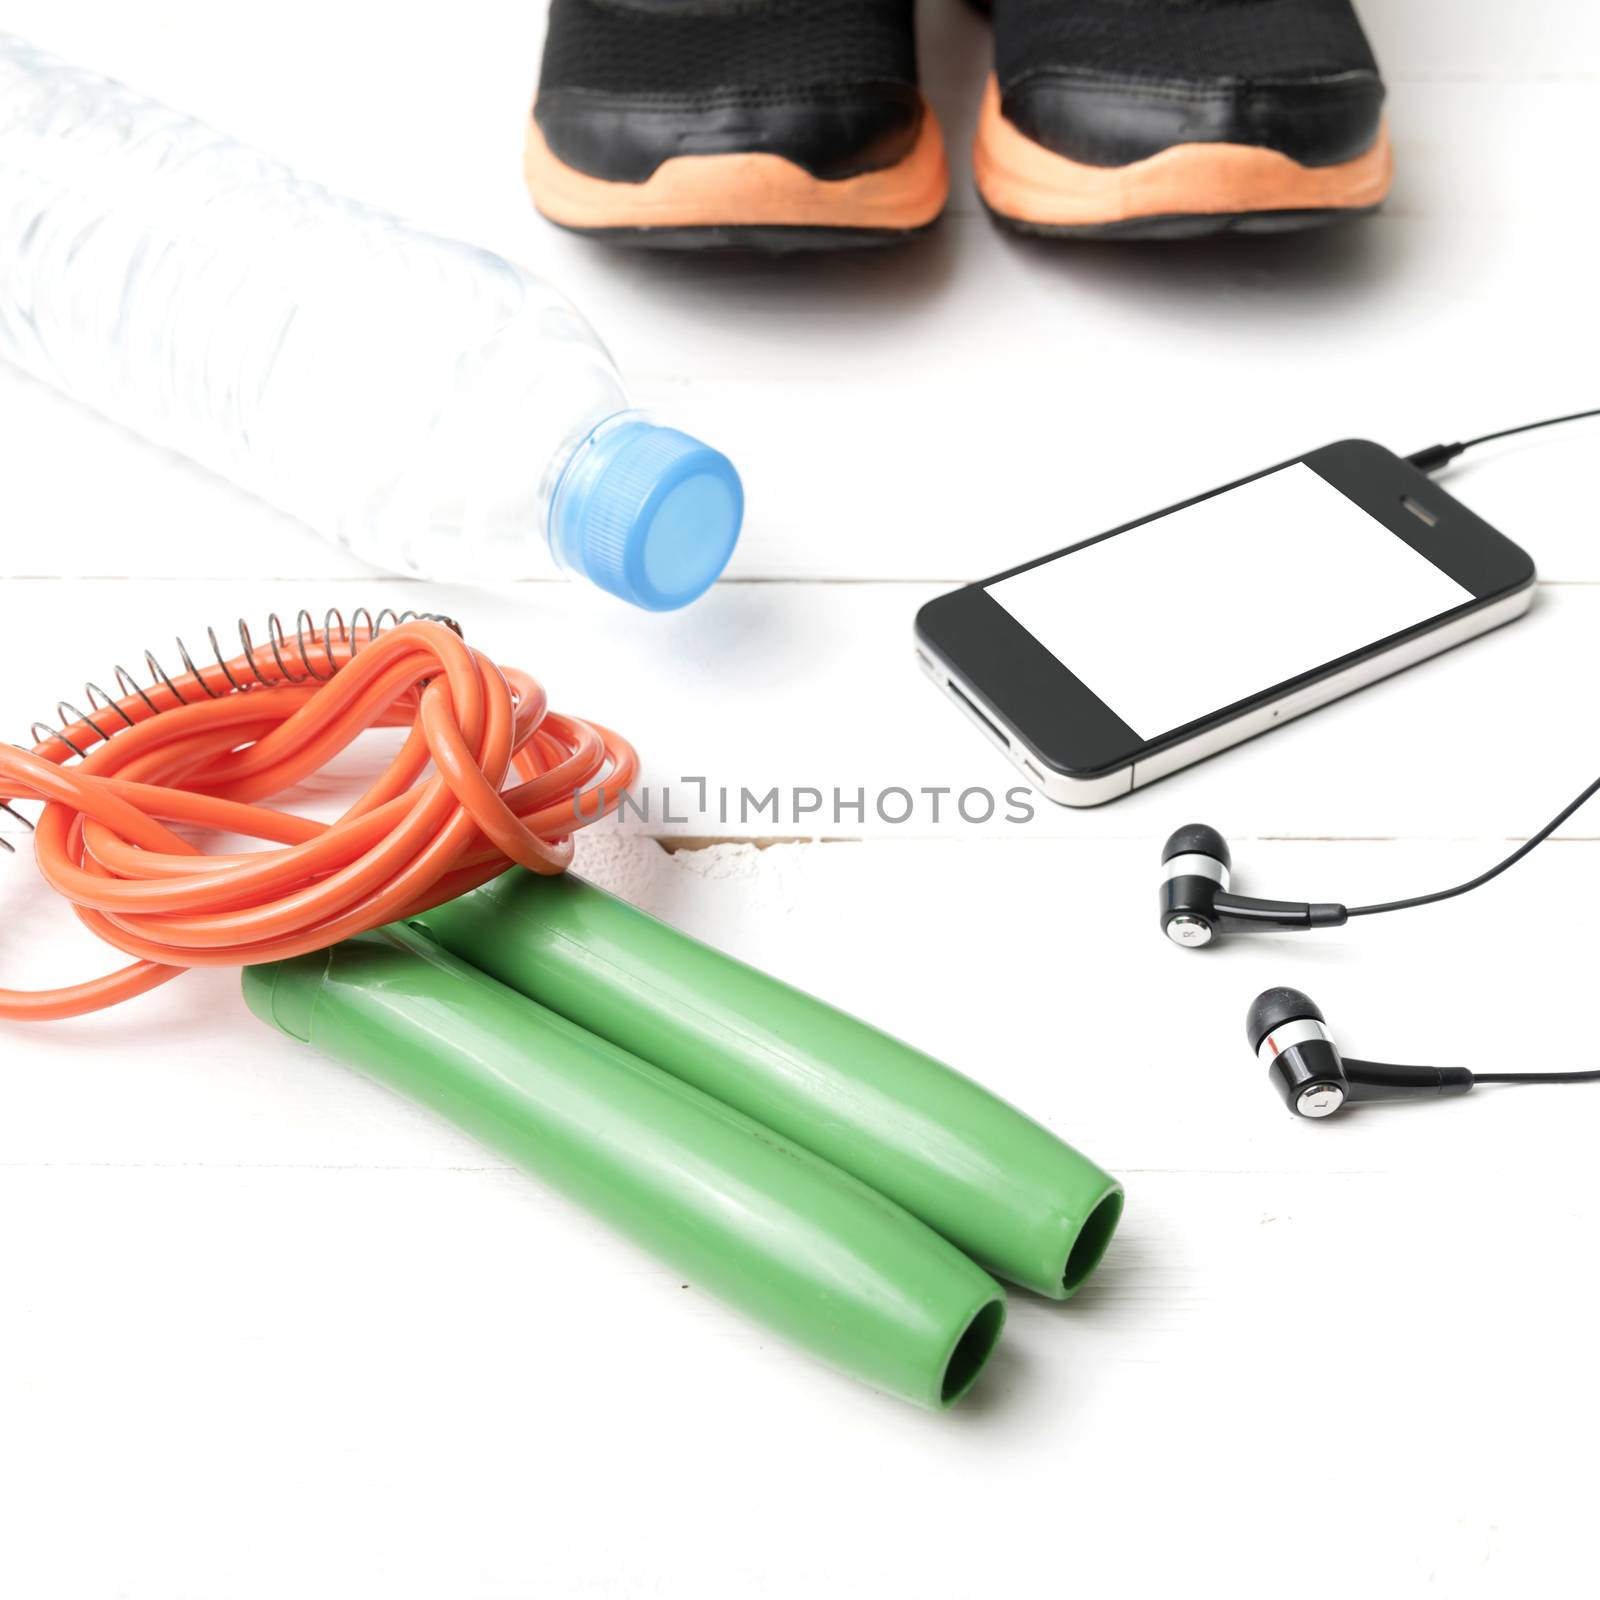 fitness equipment : running shoes,jumping rope,phone and water bottle on white wood table